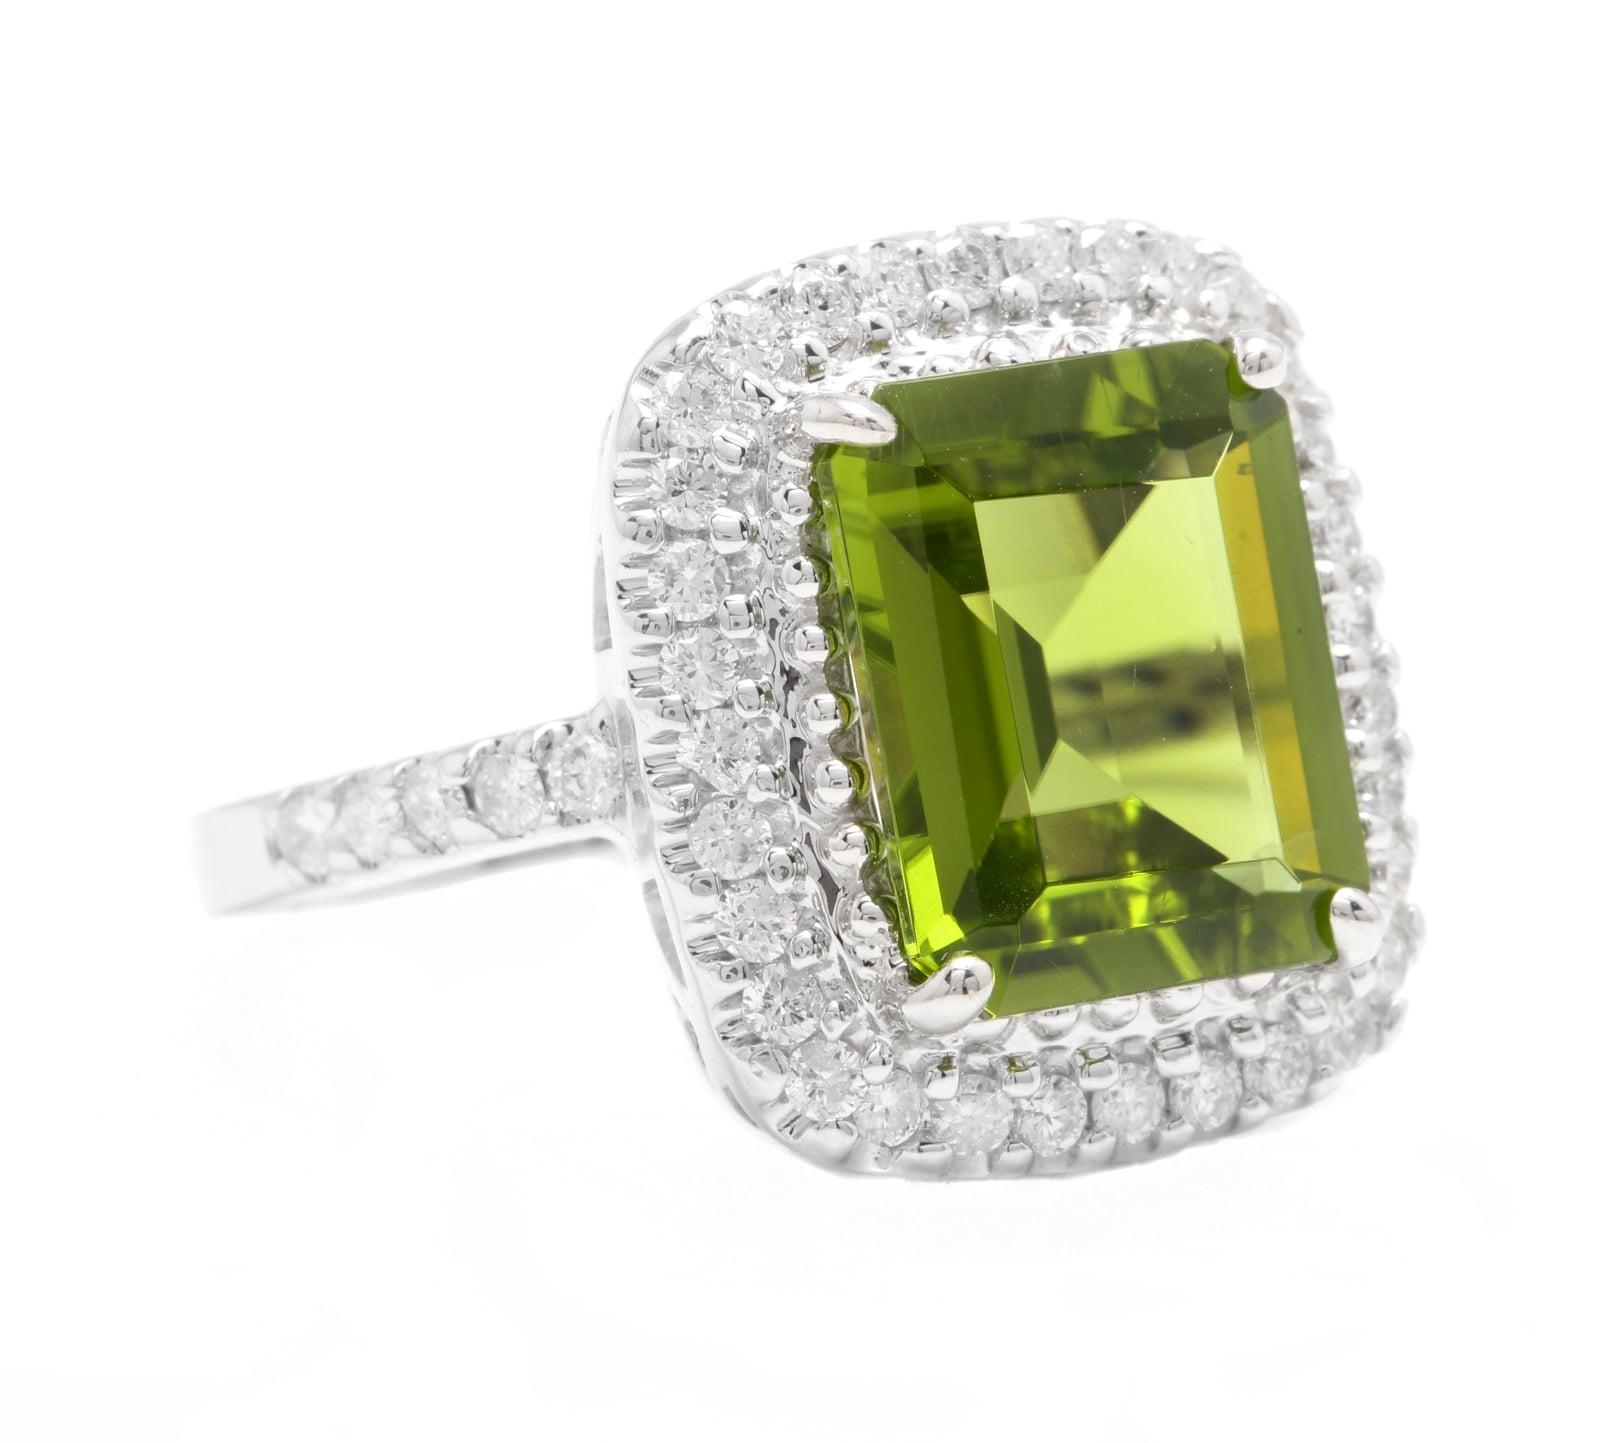 6.30 Carats Natural Very Nice Looking Peridot and Diamond 14K Solid White Gold Ring

Stamped: 14K

Suggested Replacement Value: Approx. $6,500.00

Total Natural Emerald Cut Peridot Weight is: Approx. 5.50 Carats 

Peridot Measures: Approx. 12 x